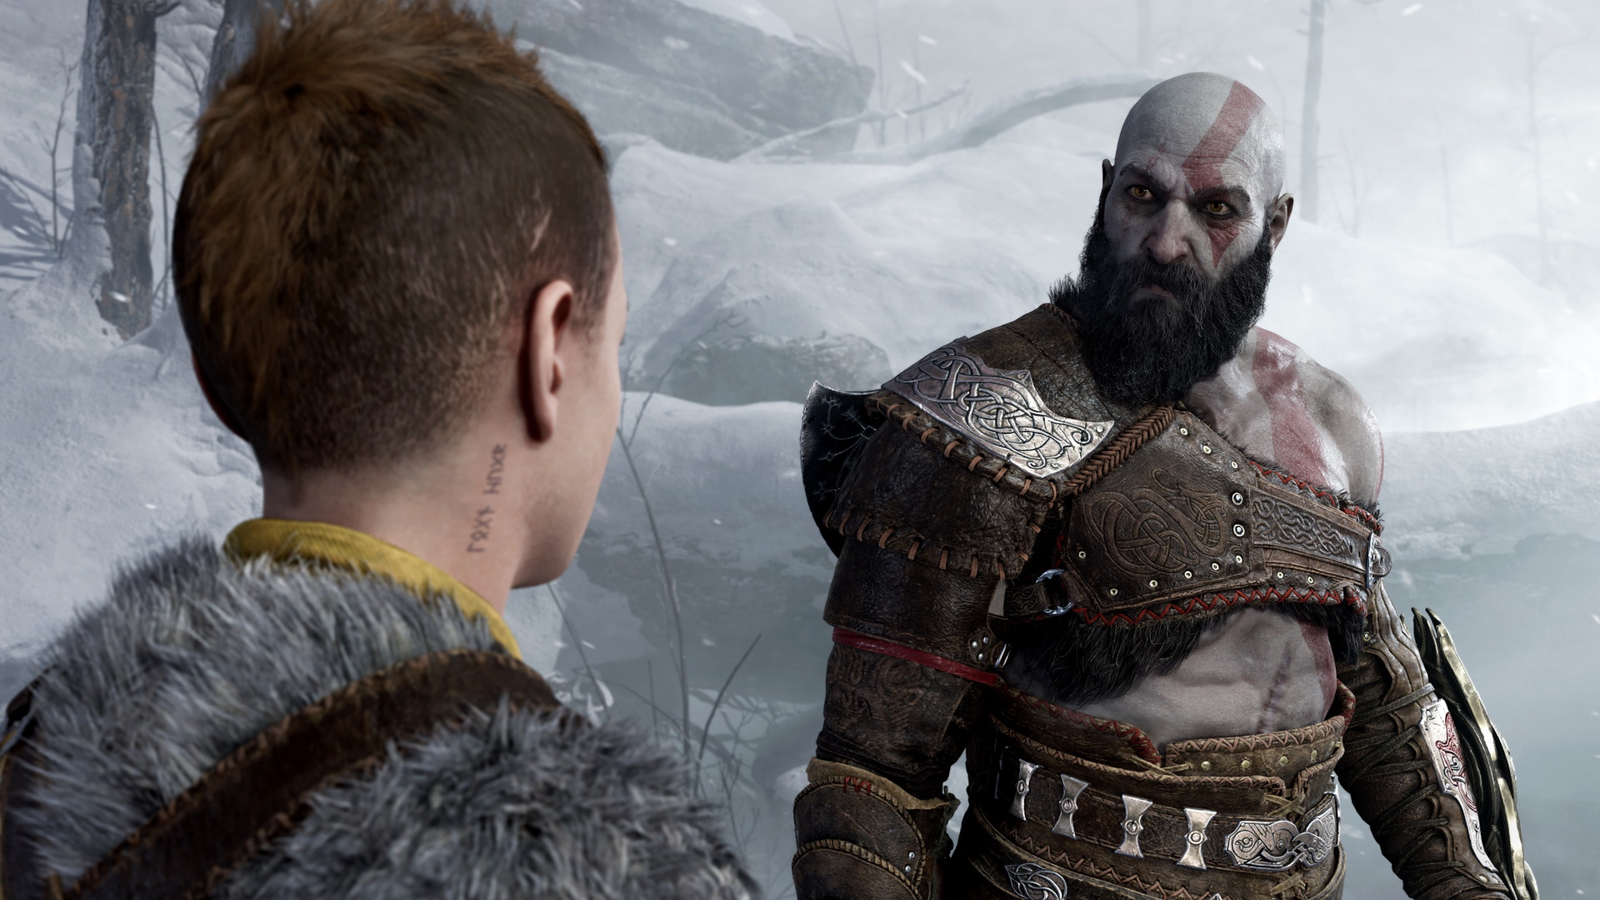 All God of War Ragnarok trophies on PS4 and PS5 - How to get Platinum?